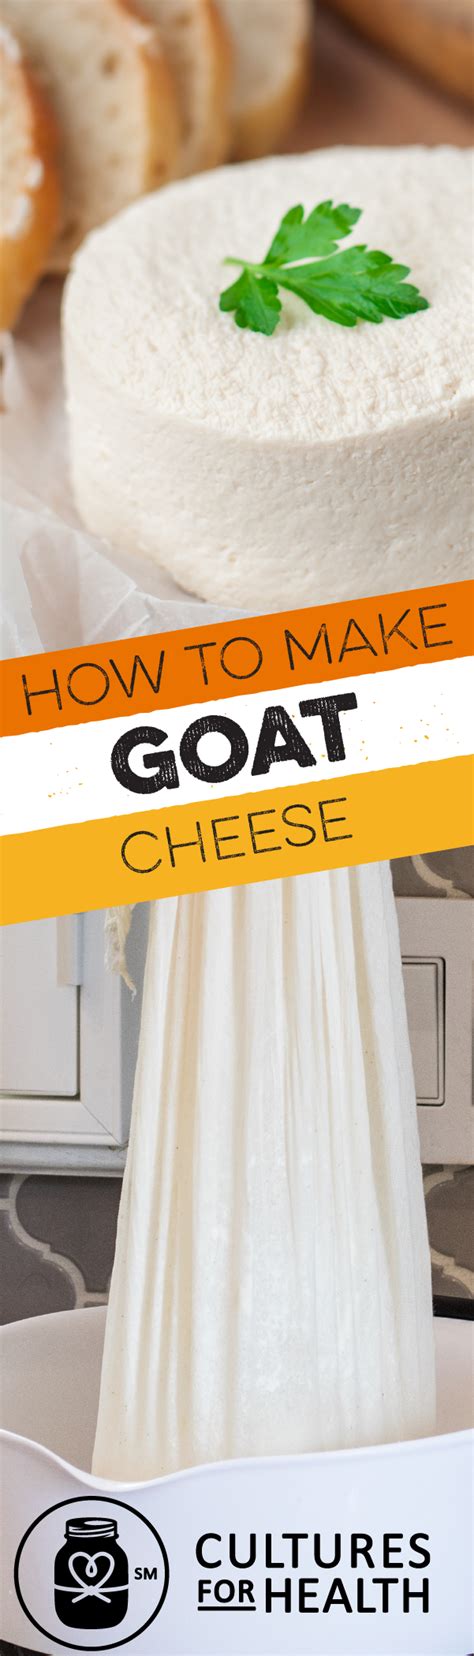 Its Easy To Make Fresh And Delicious Goat Cheeses At Home With This